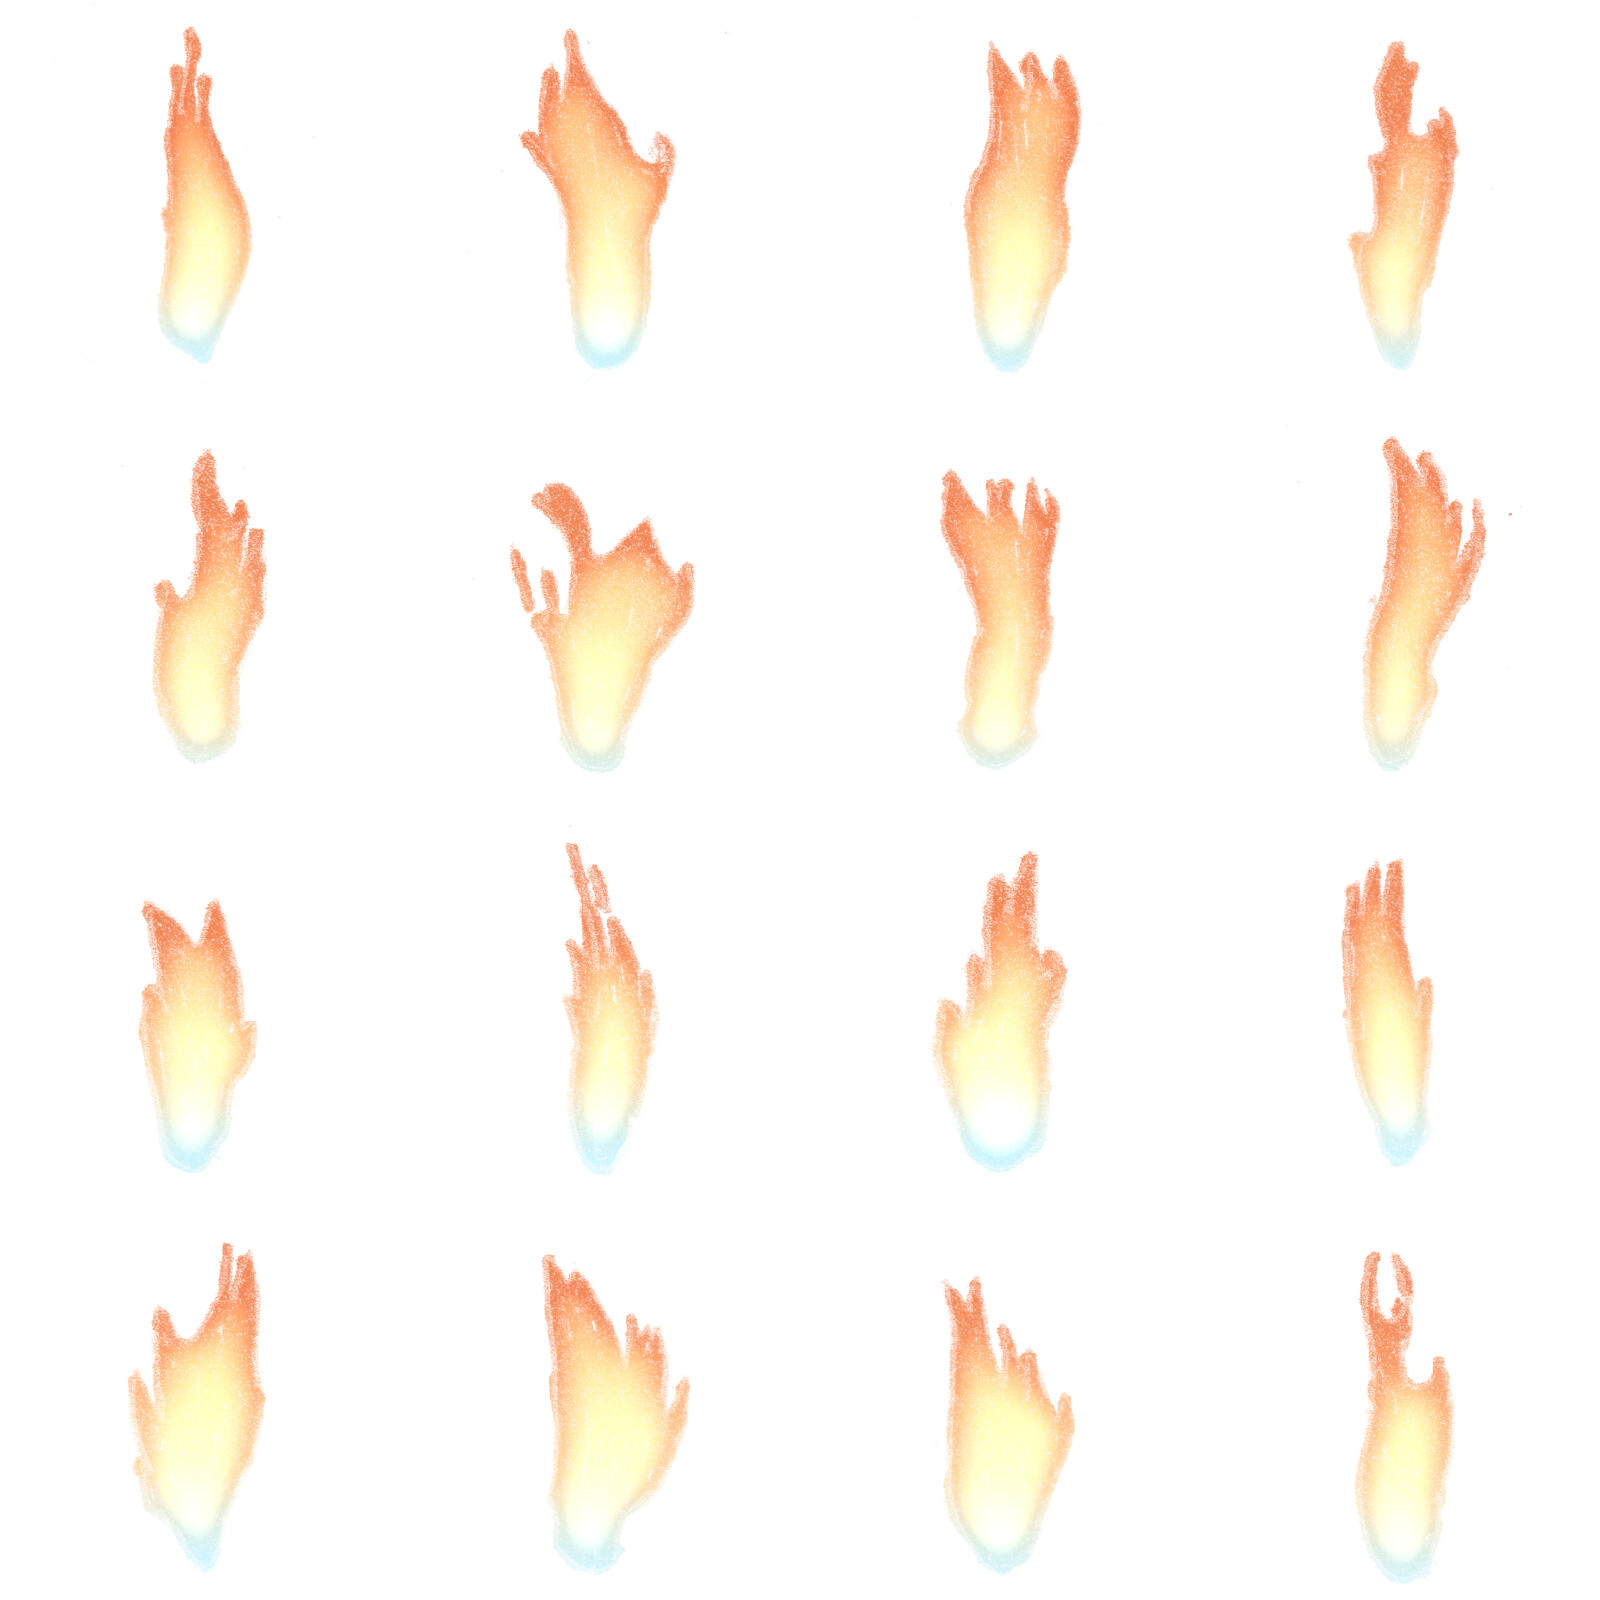 Flames scanned and laid out onto a flipbook texture grid, with colour gradients added in Photoshop.